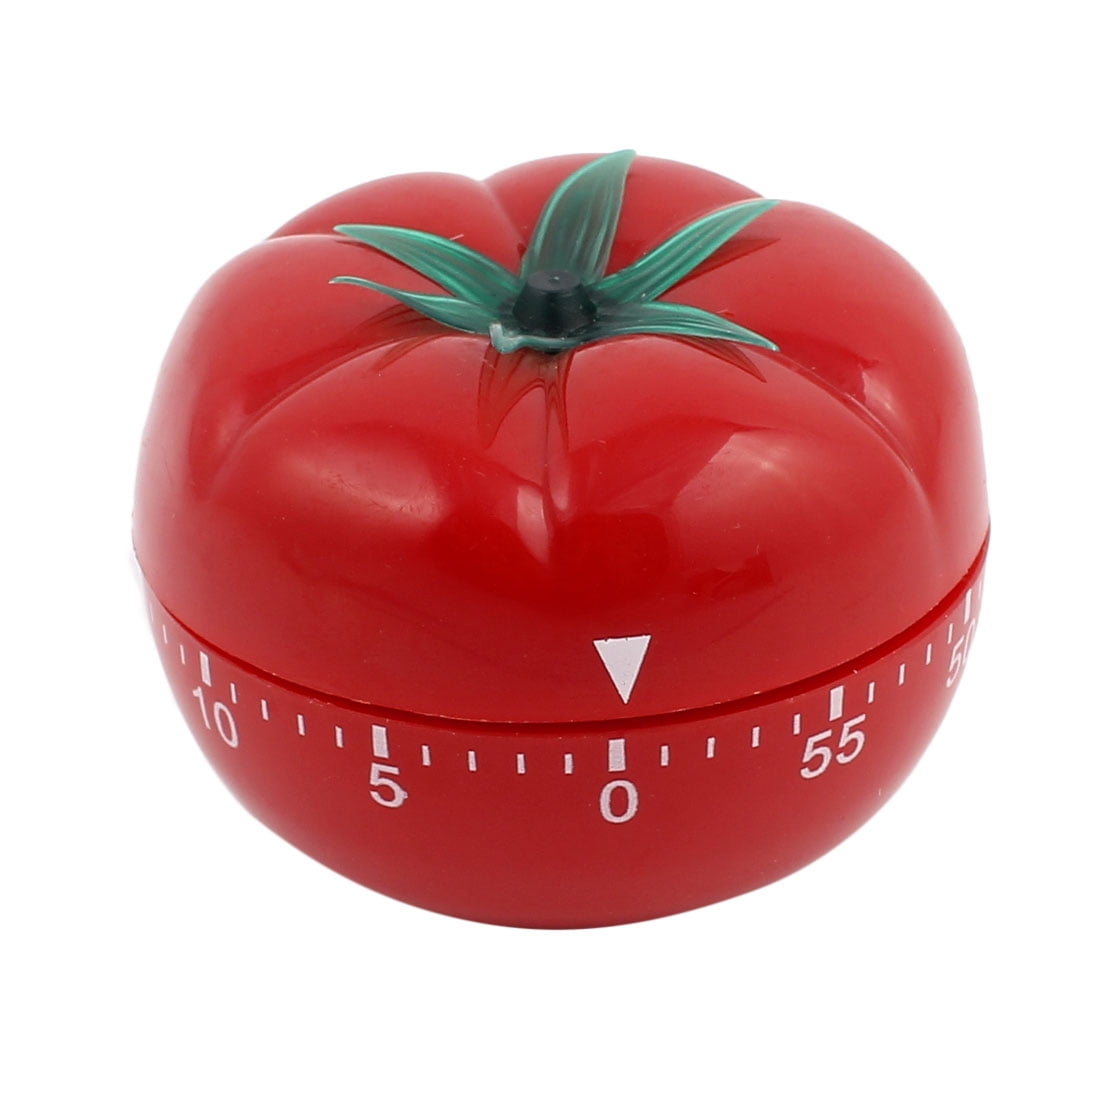 1xKitchen Tomato Shaped Timer 60 Minutes Cooking Mechanical Countdown A7Z8 E3Z5